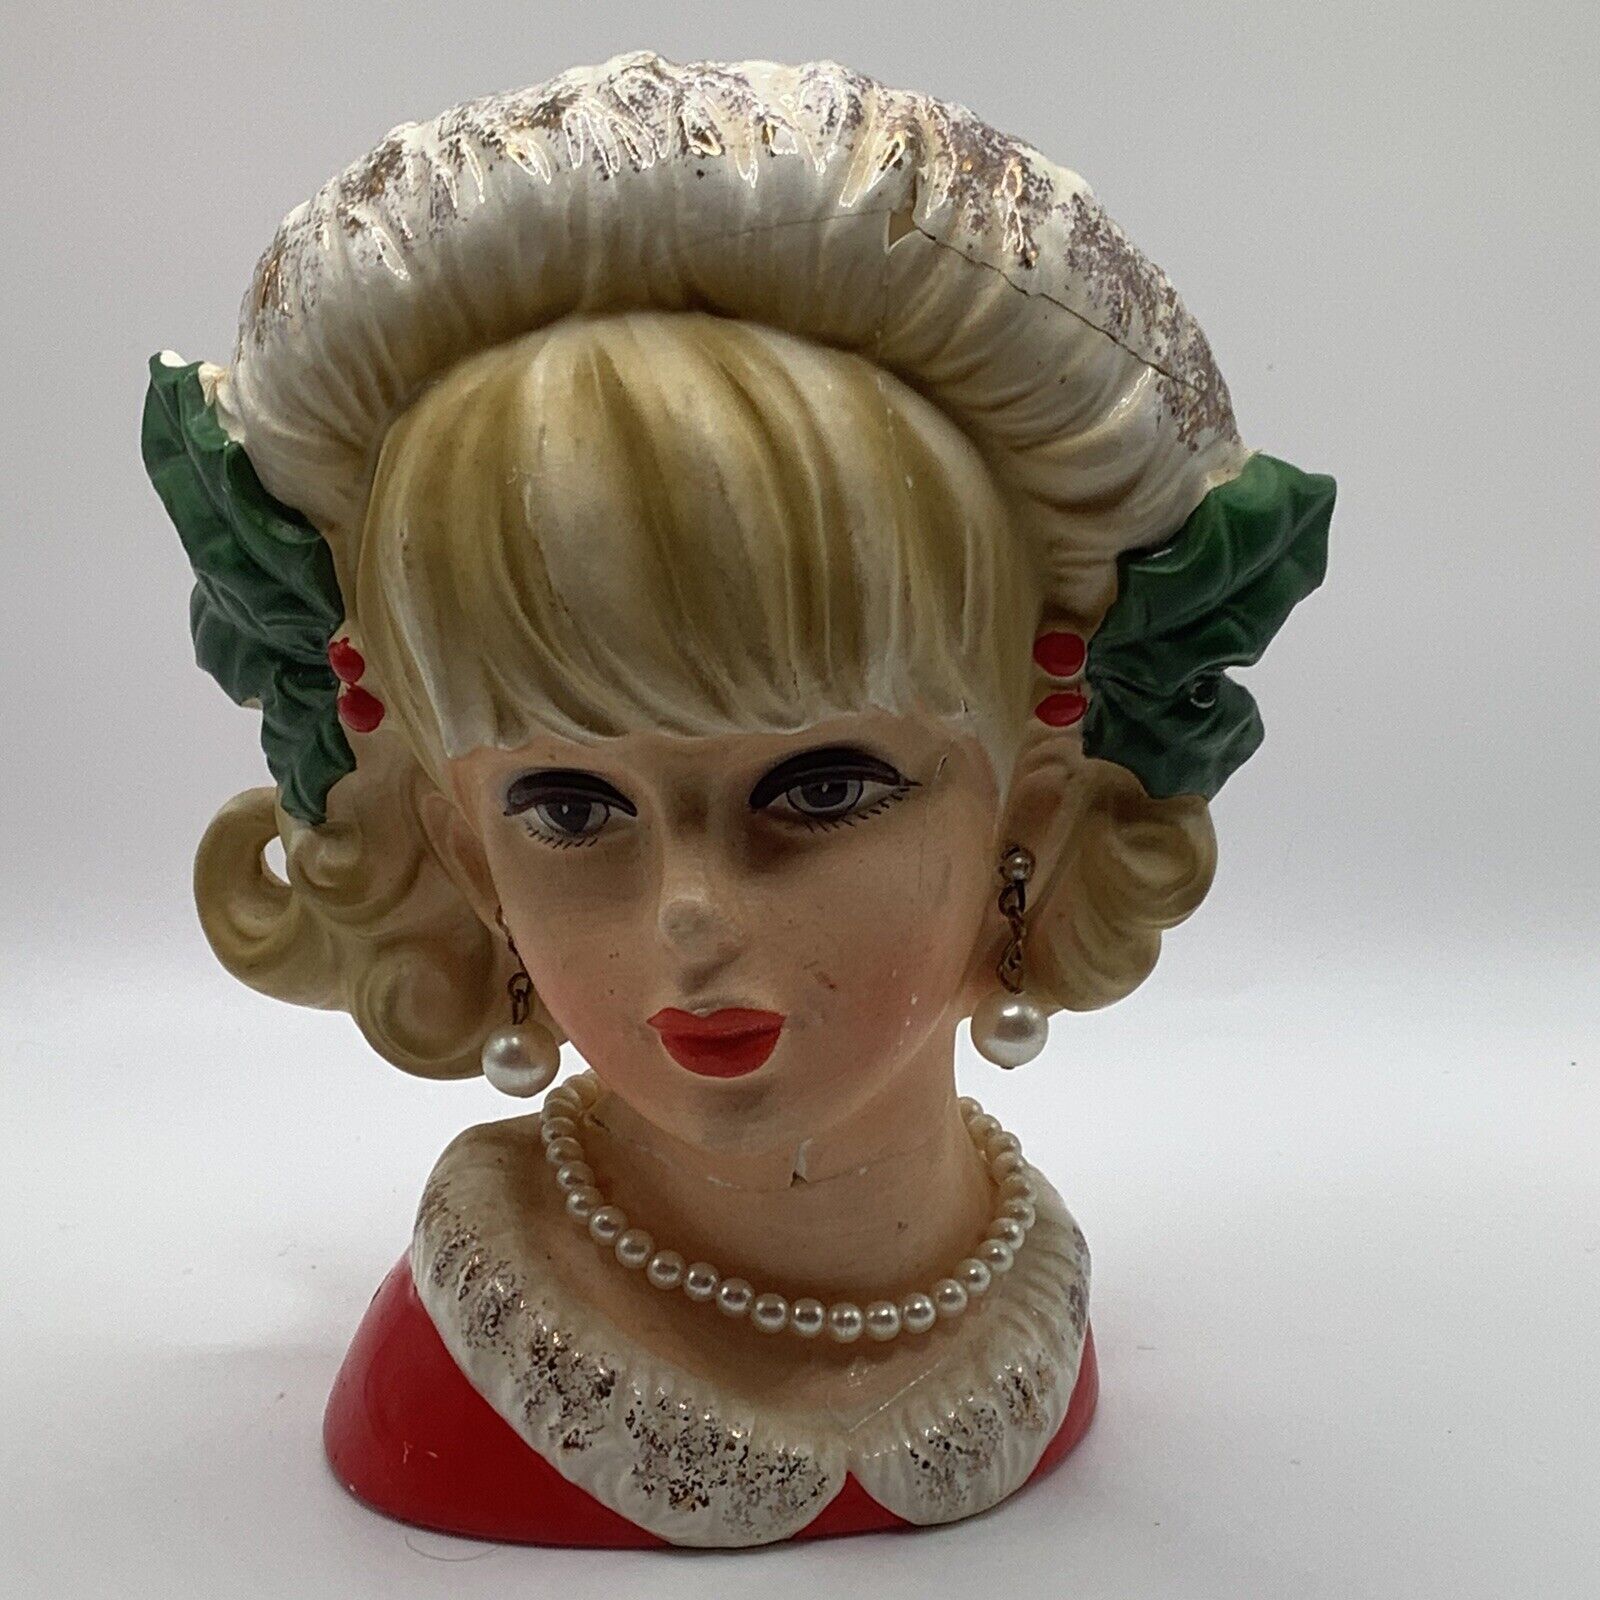 Vintage Napcoware 1950’s Christmas Lady With Pearls Head Vase #X7638 RESTORED